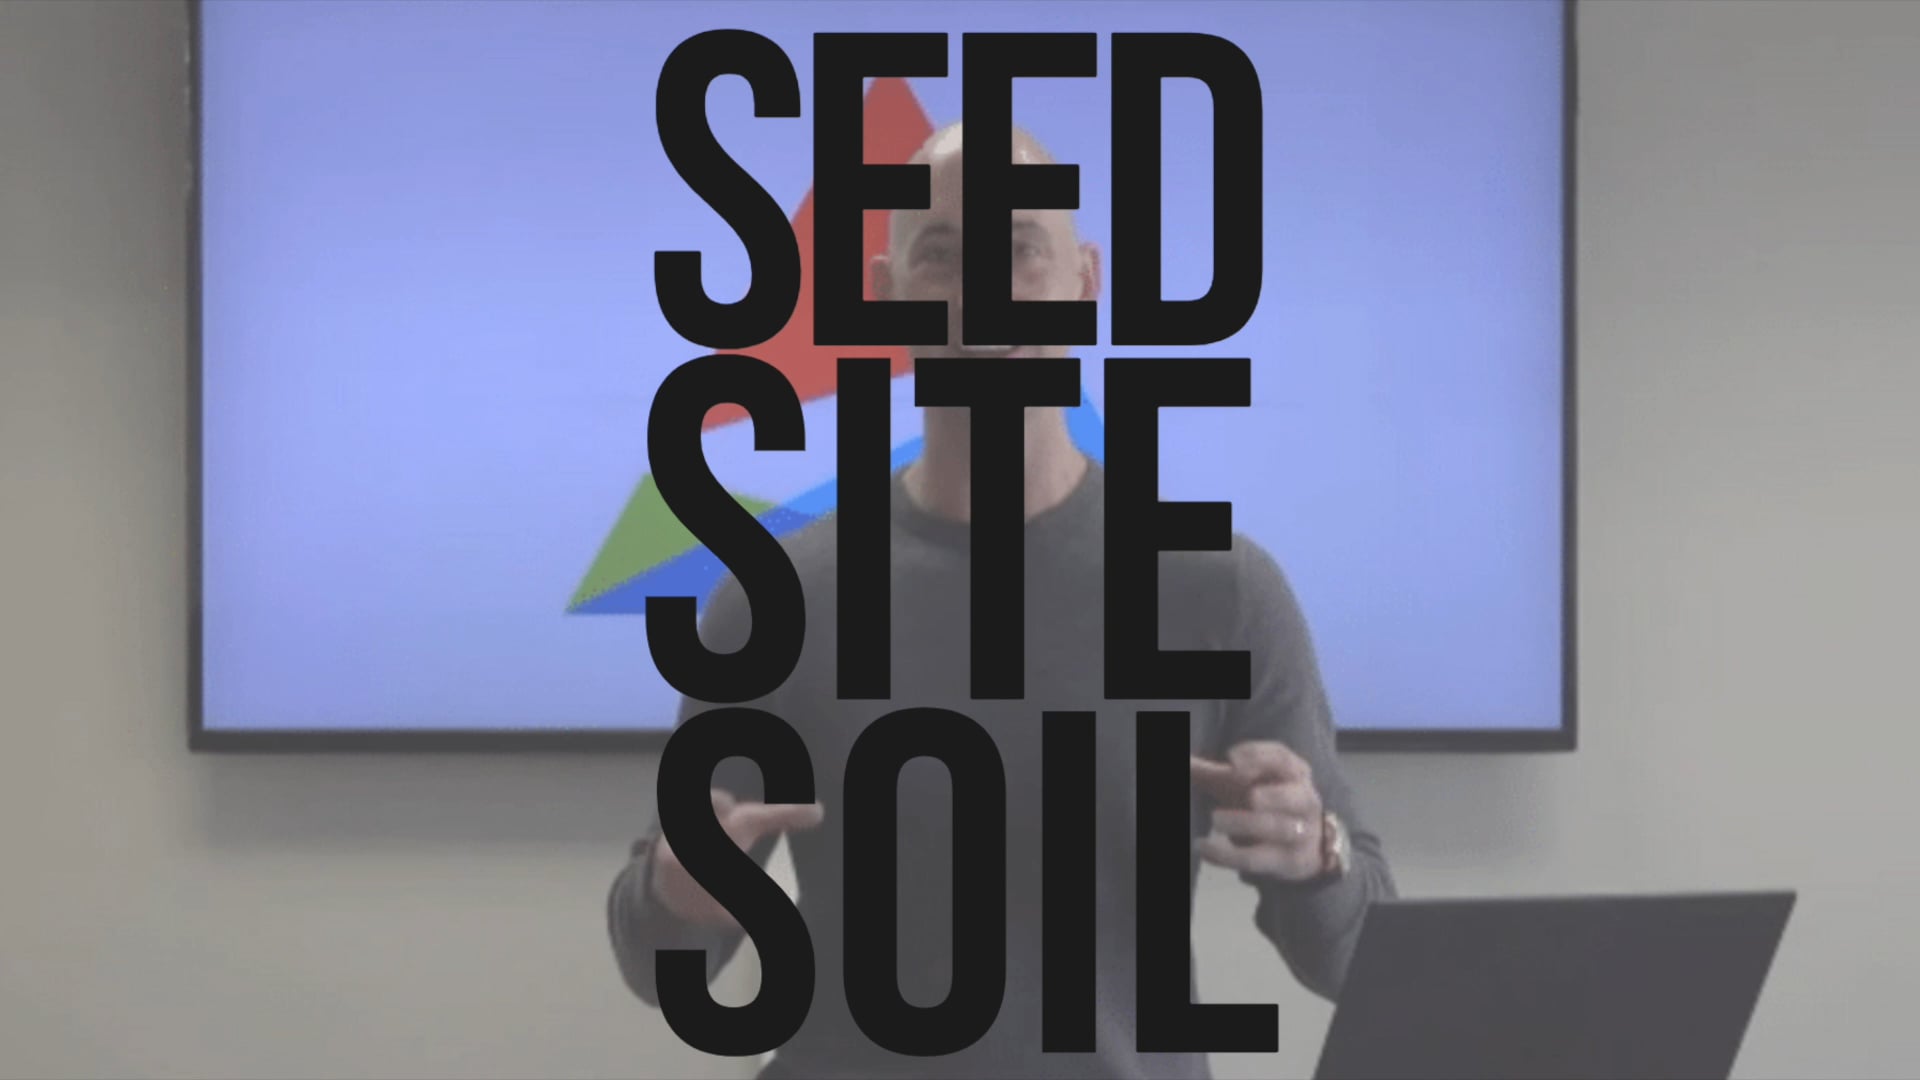 Seed Site Soil